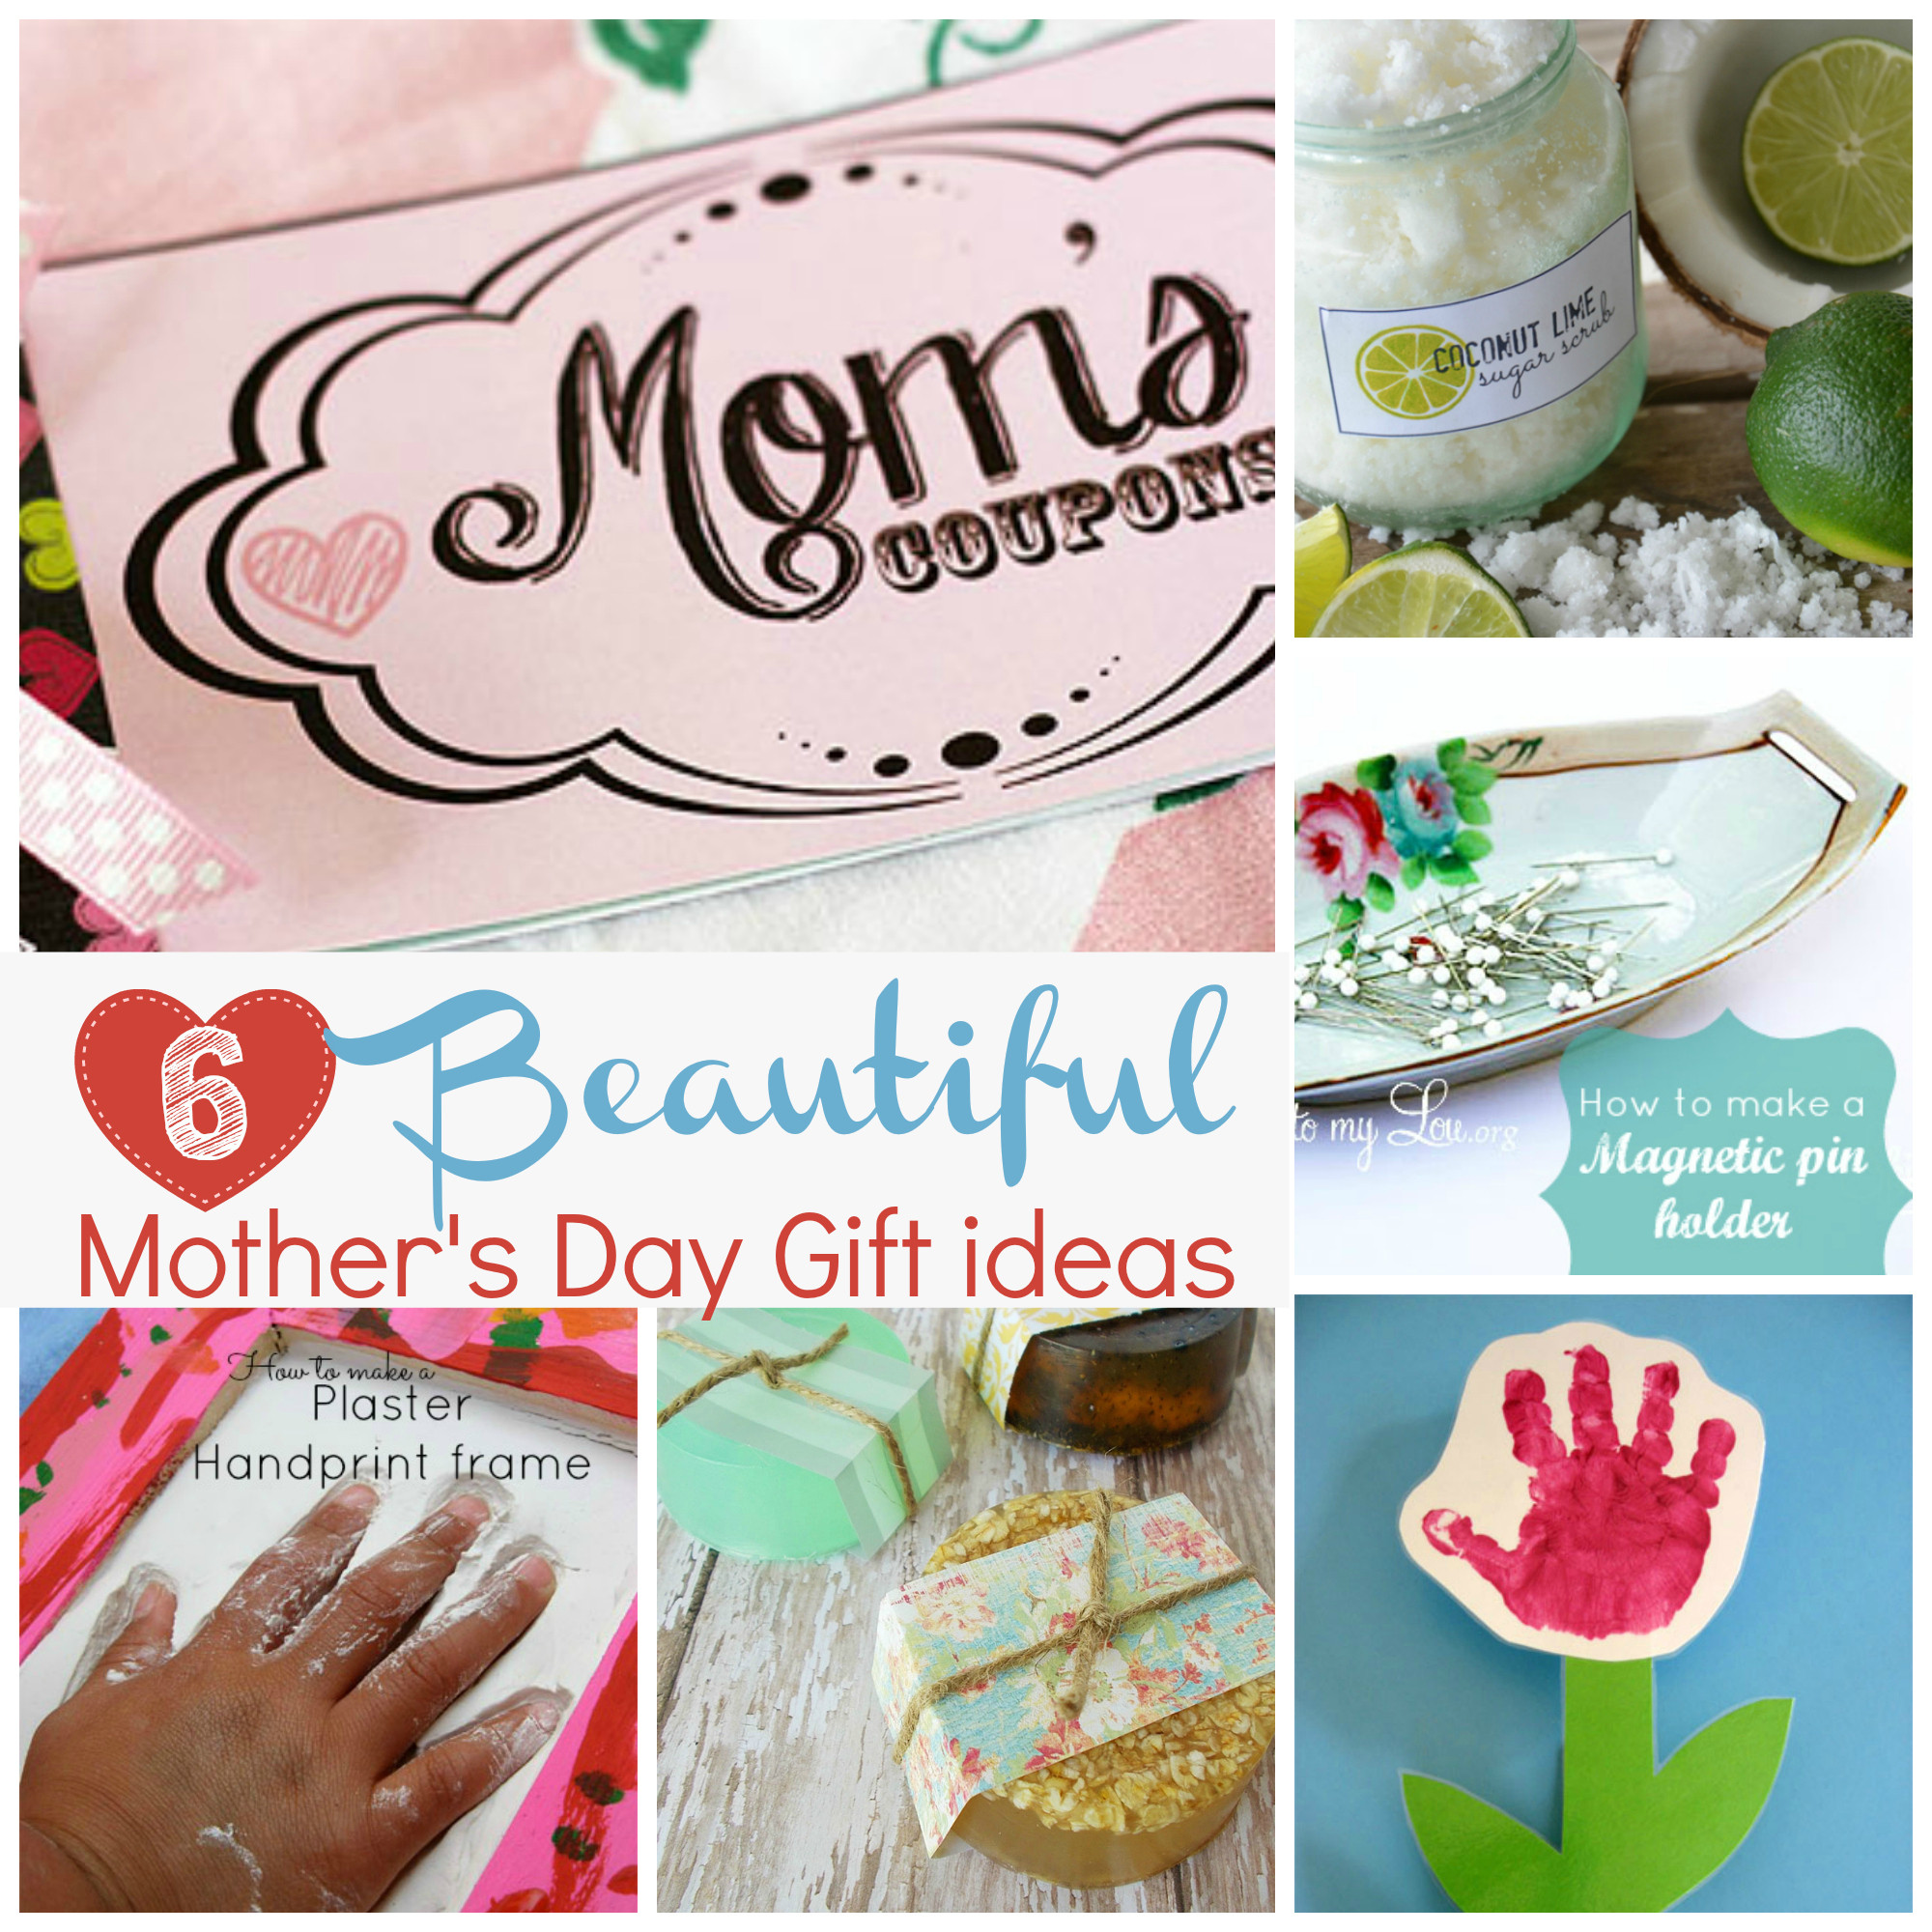 Mothers Da Gift Ideas
 Handmade t ideas for Mother s Day